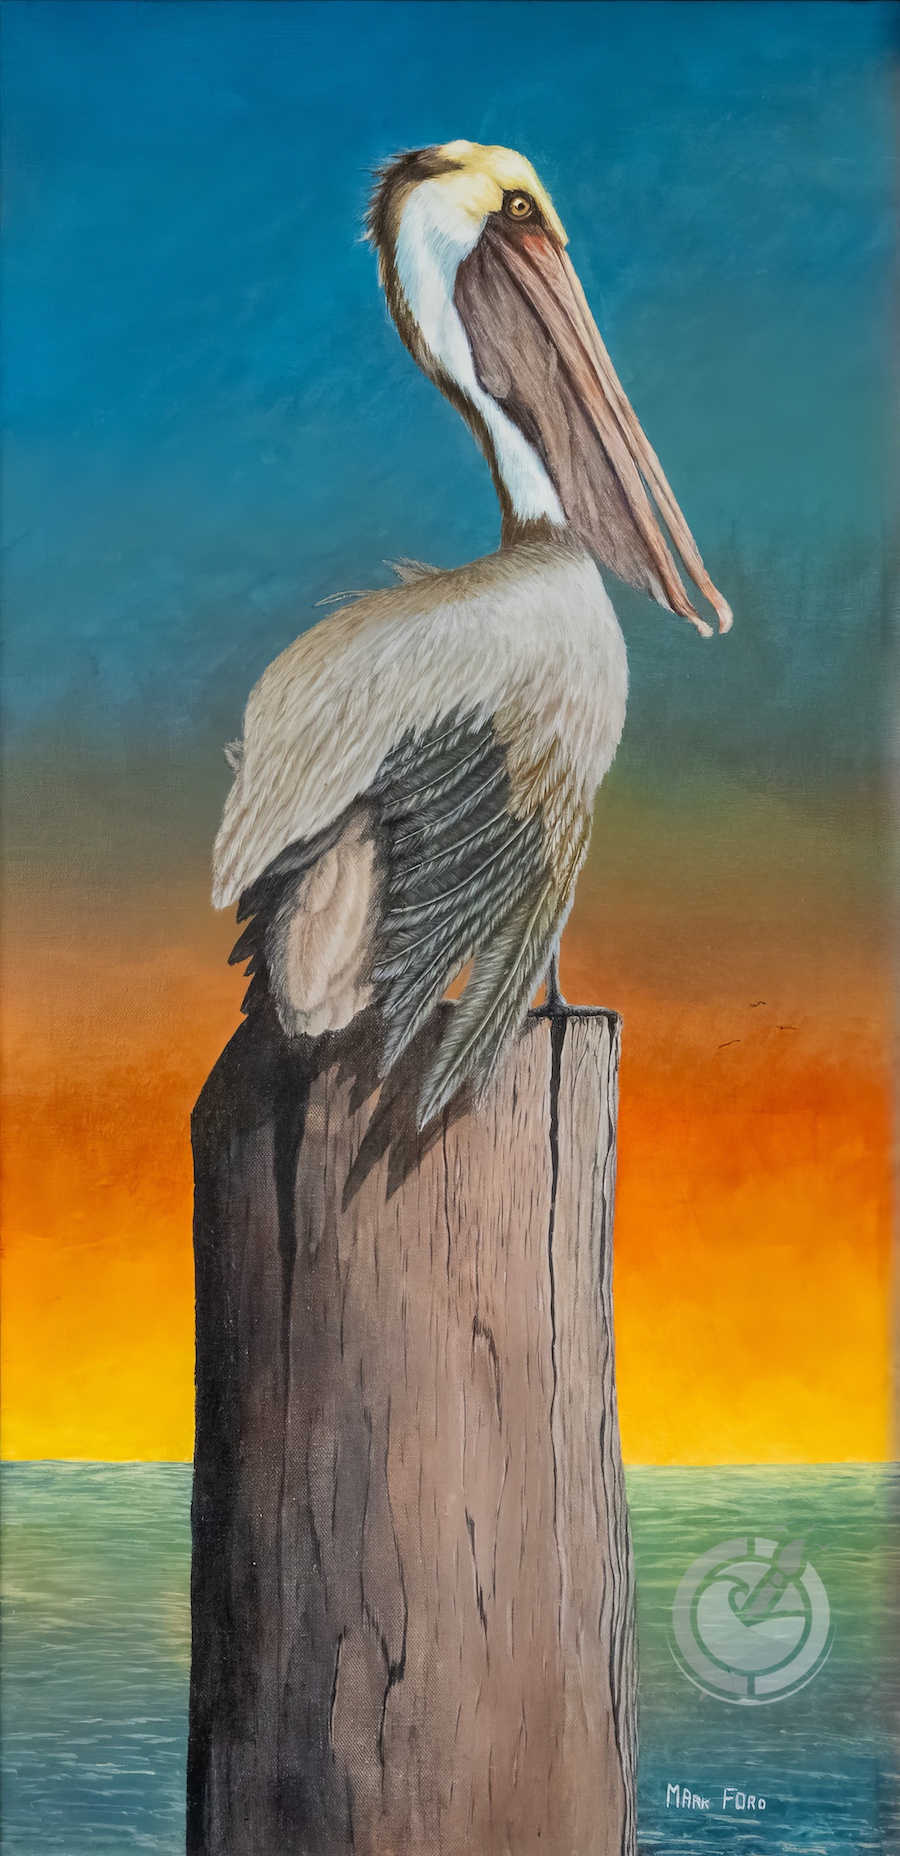 While coastal pelicans are more common, some species venture into oceanic environments. These beautiful birds are known for their distinctive pouches used for catching fish, which they then drain before swallowing.